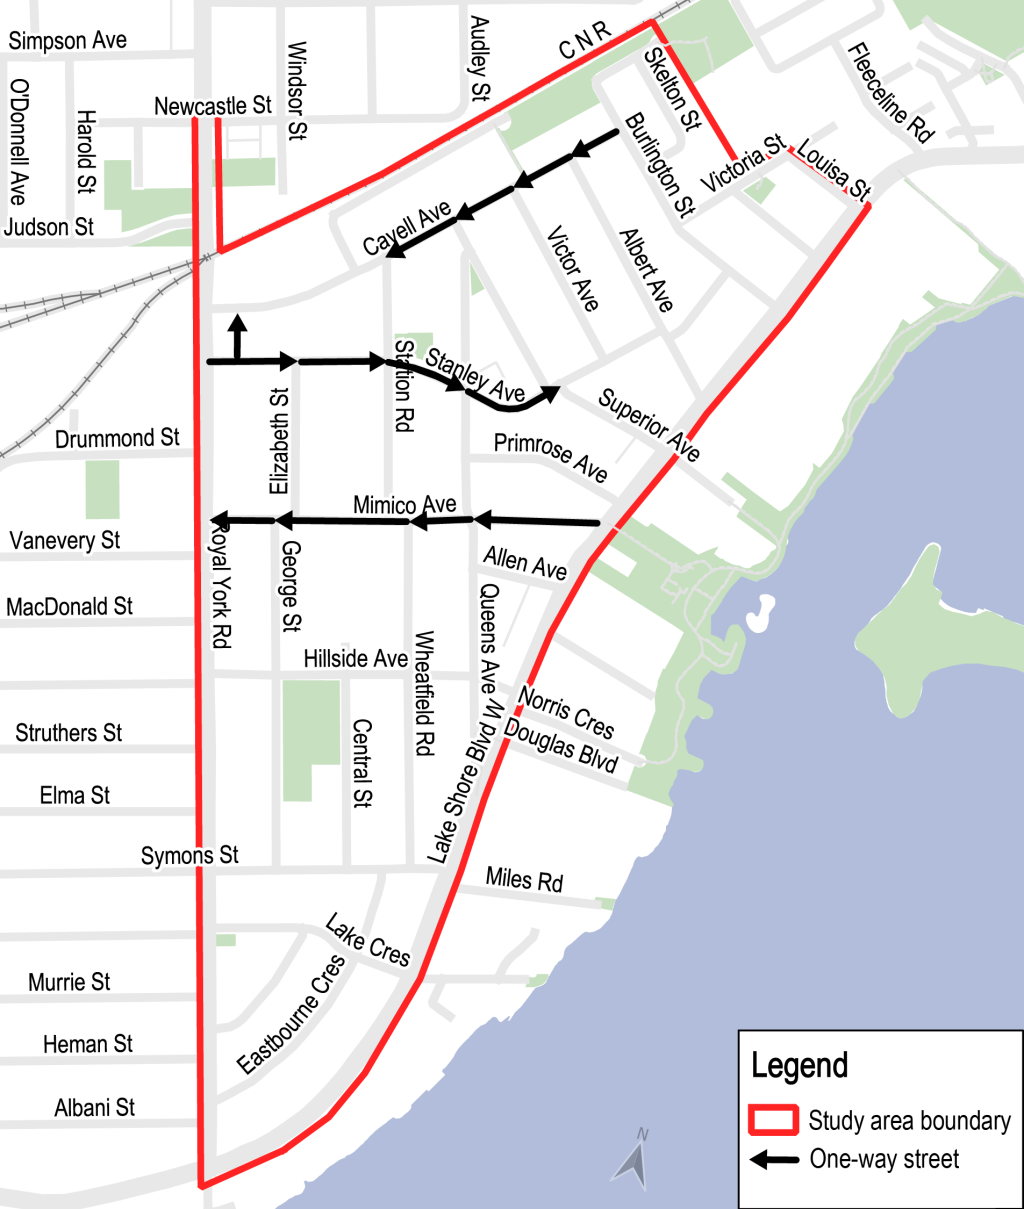 The project area is located between: Newcastle Street and rail corridor to the north, Mimico Creek to the east, Lakeshore Blvd. W. to the south, and Royal York Rd. to the west. 